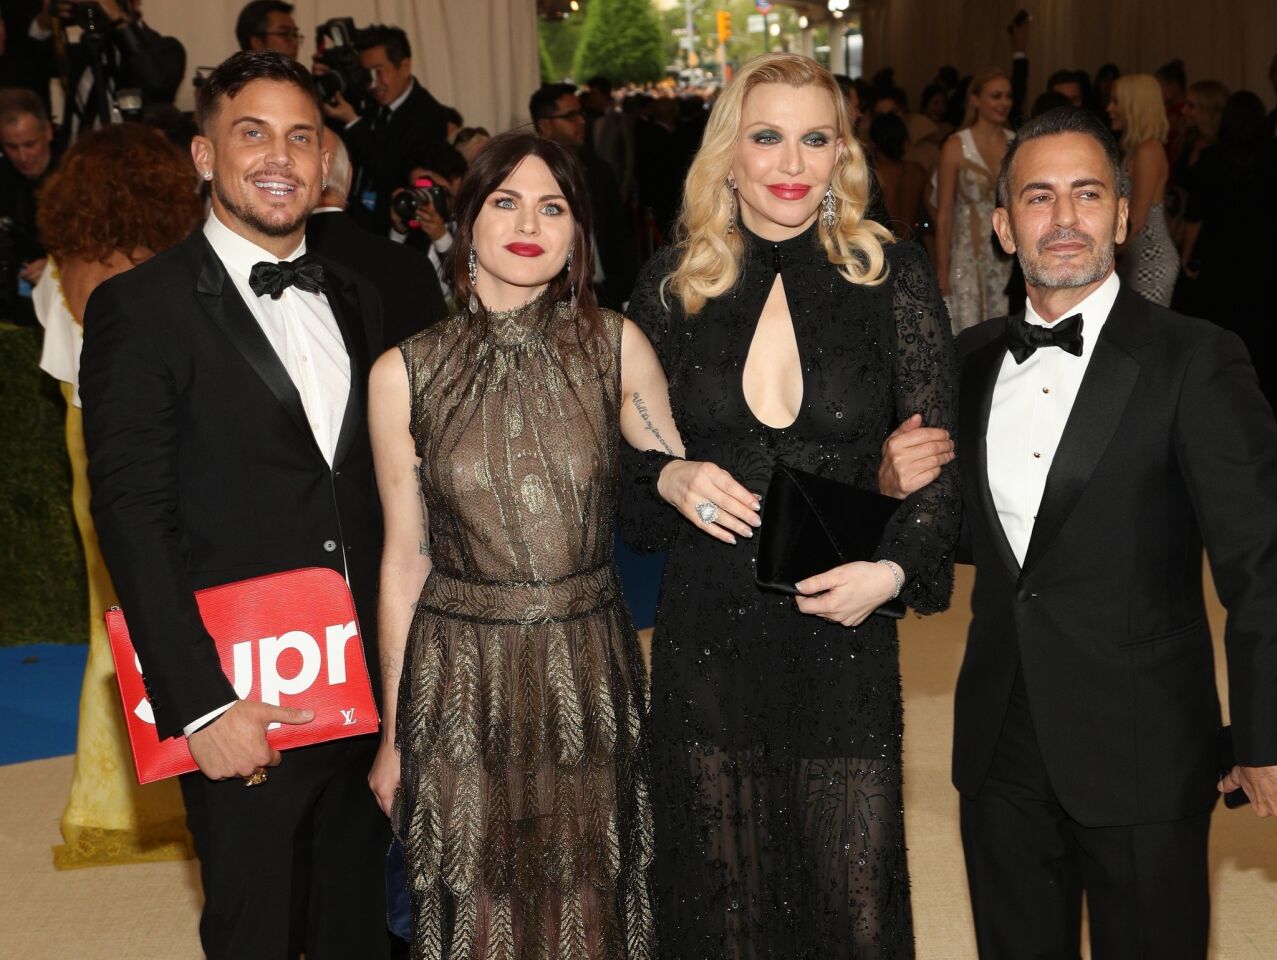 Char Defrancesco, Frances Bean Cobain, Courtney Love and Marc Jacobs arrive at the Met Gala.